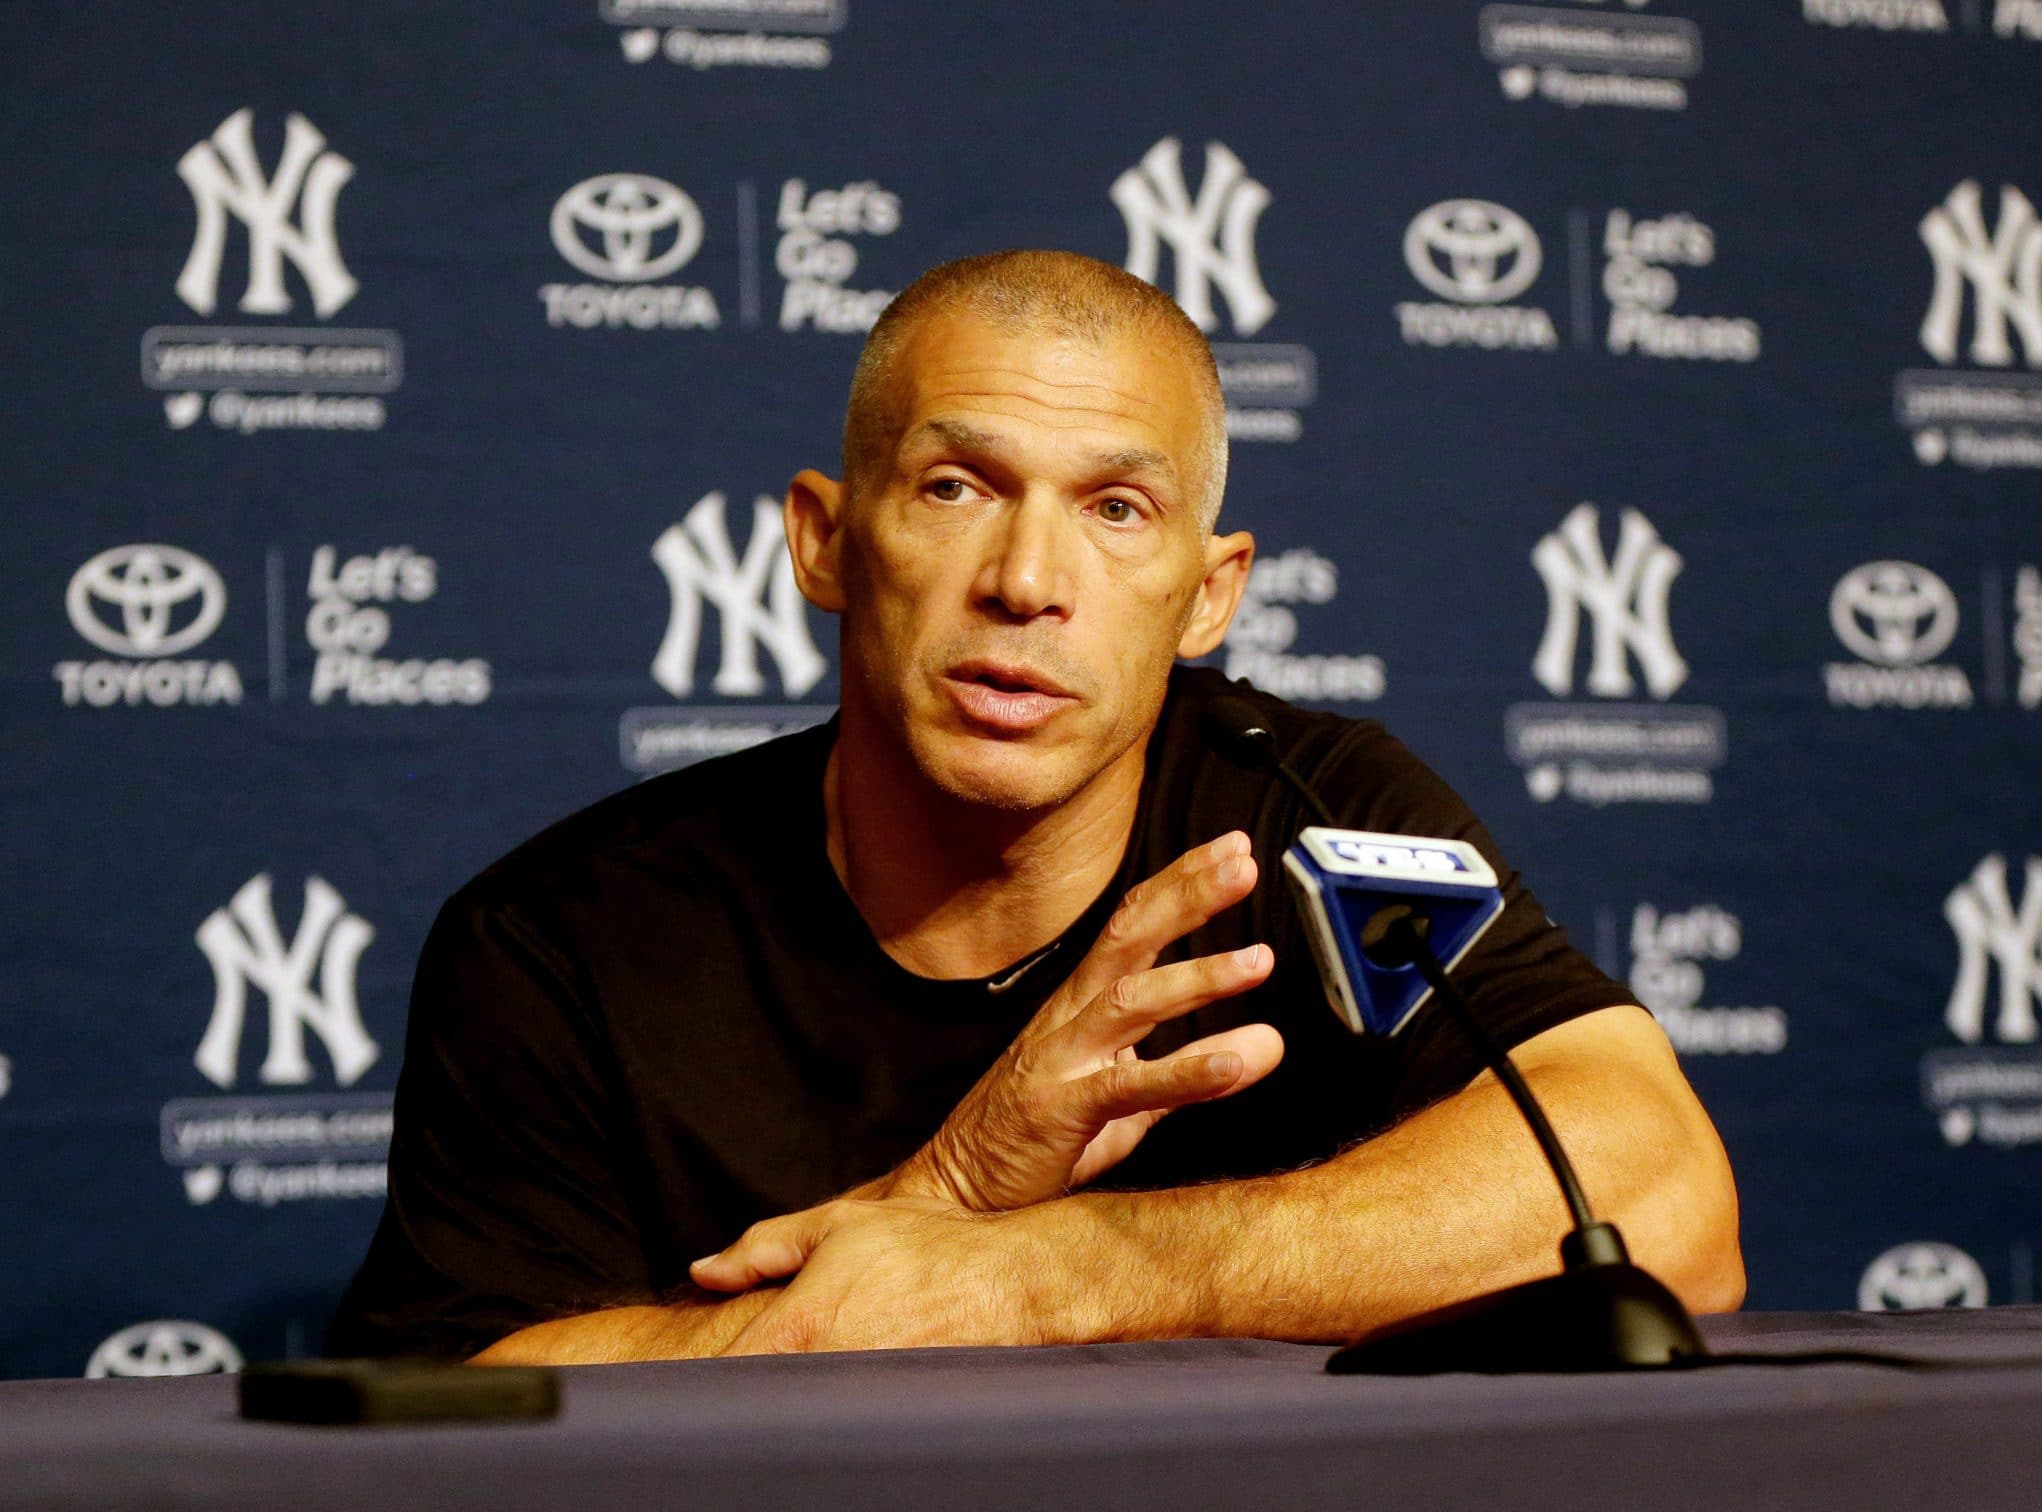 New York Yankees: Joe Girardi Declined Alex Rodriguez's Request To Play Third In Final Game 